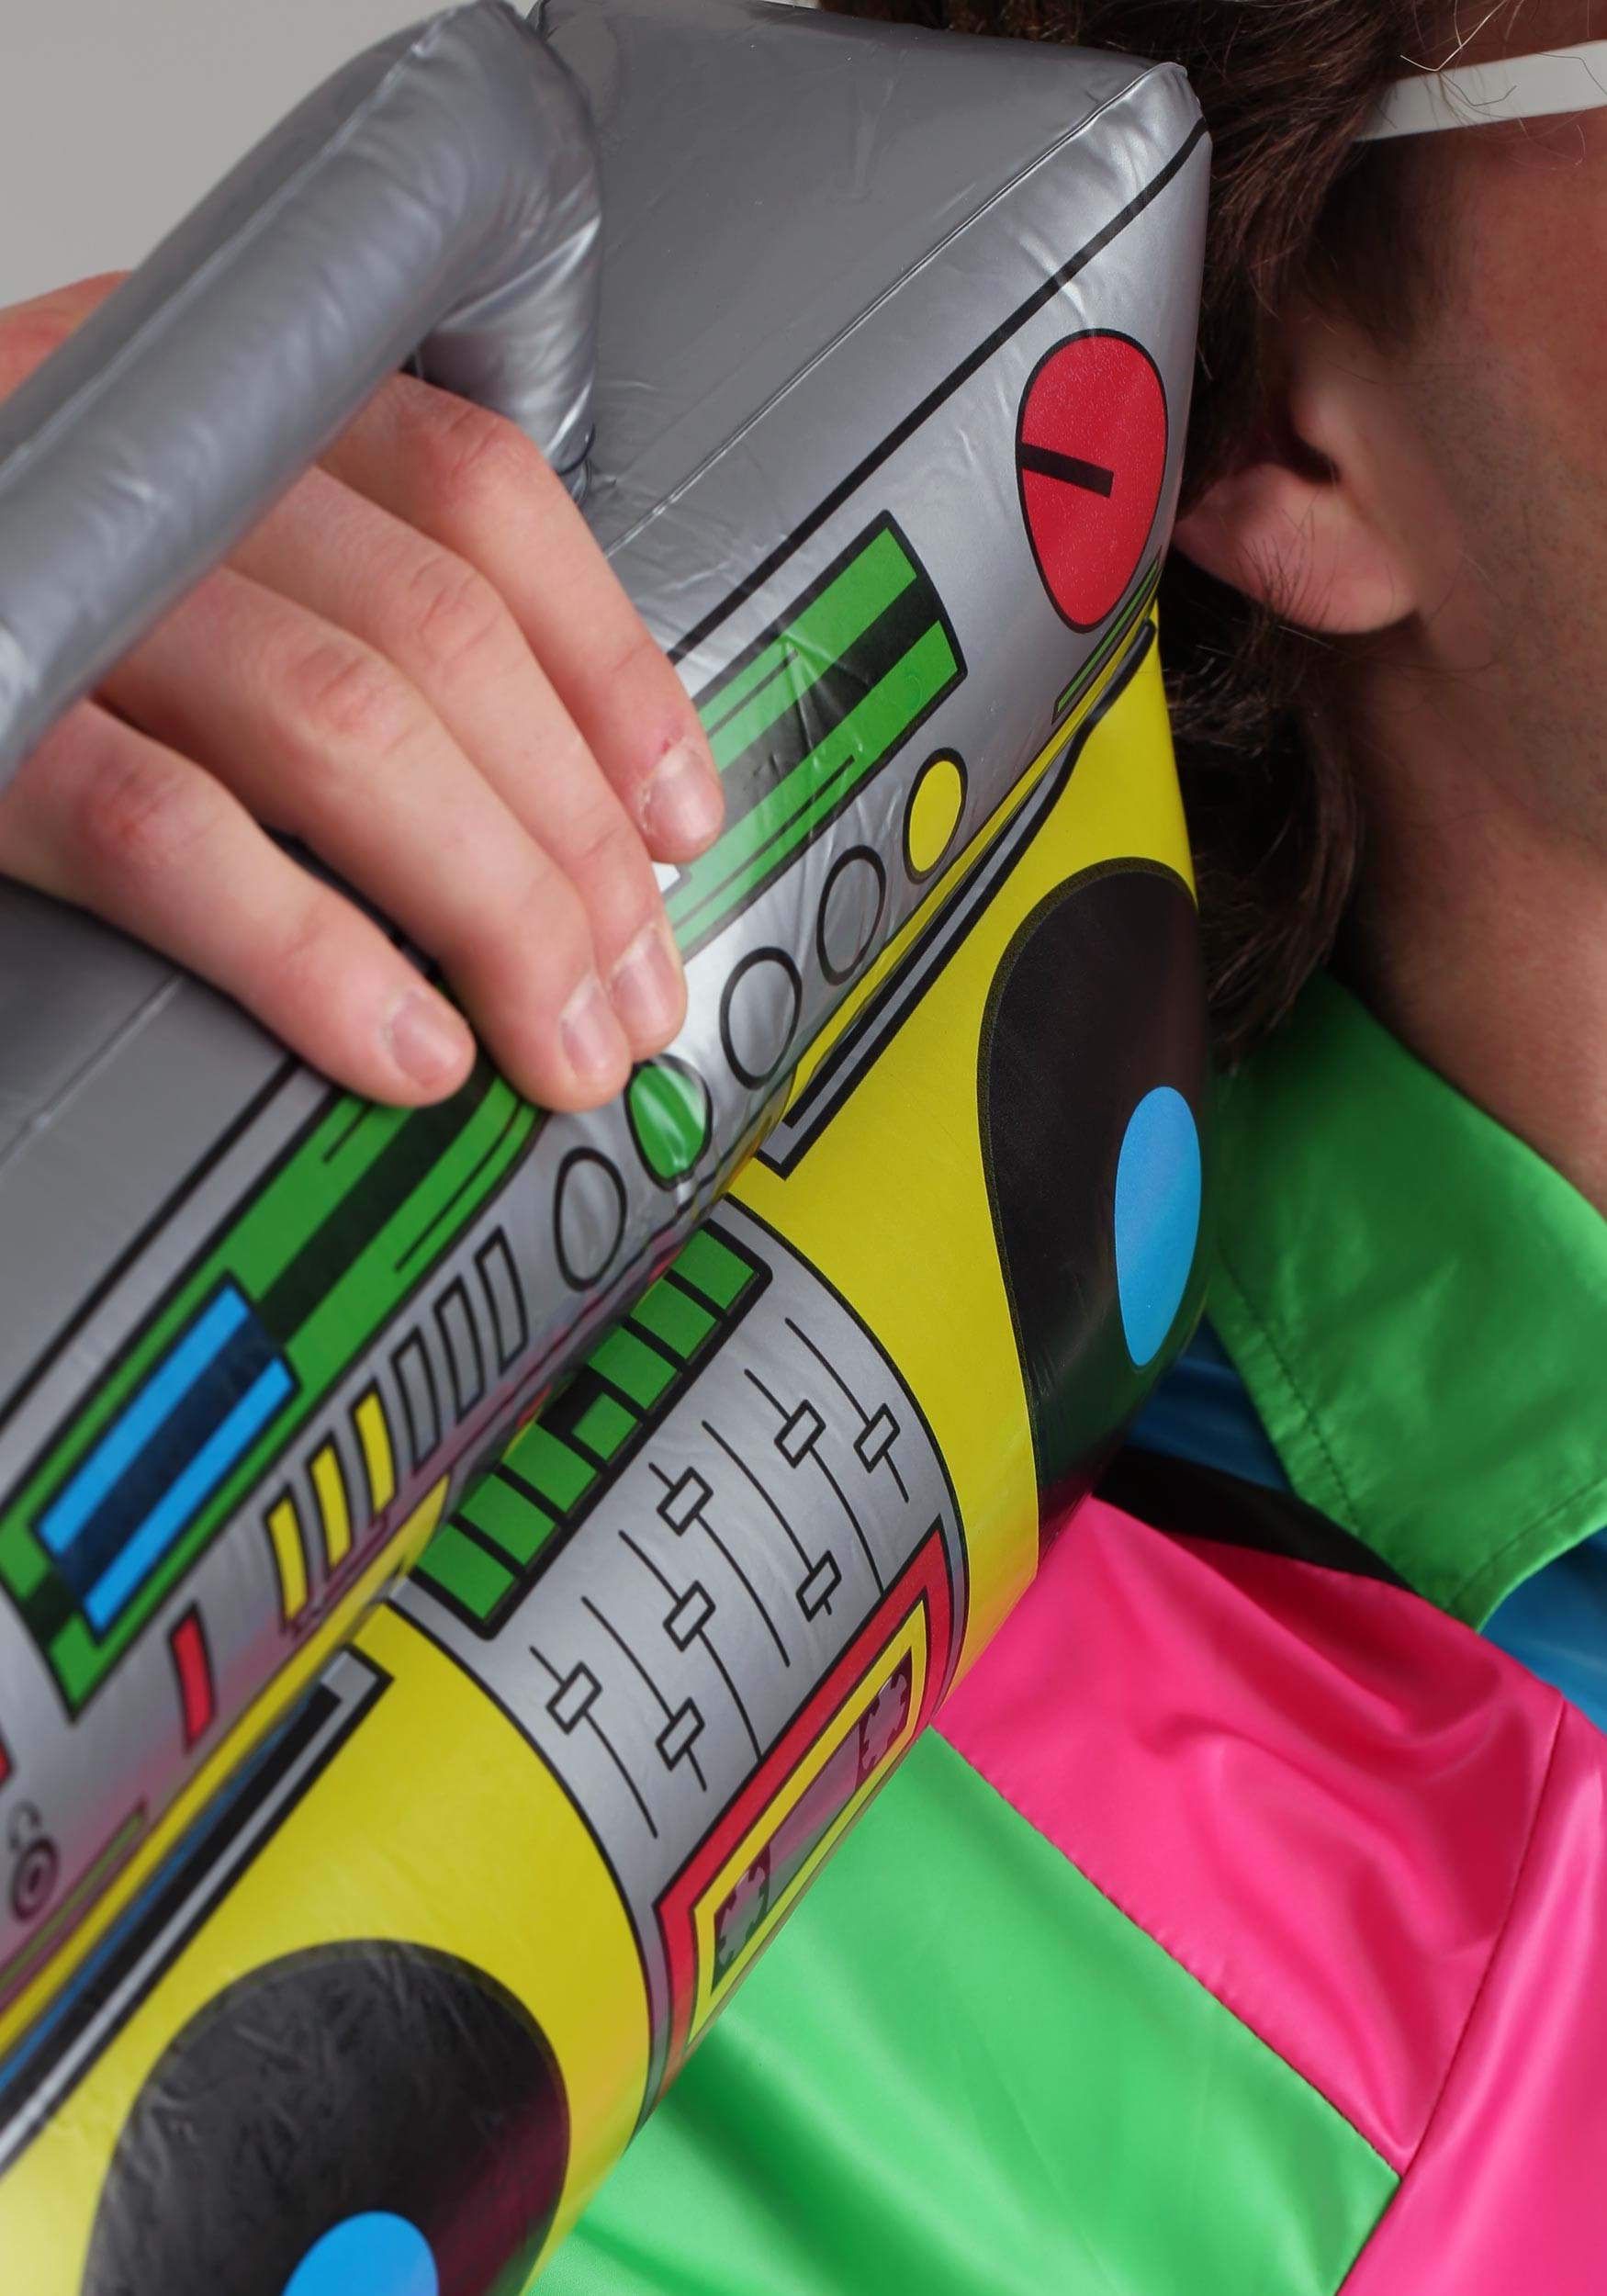 Inflatable 80s Boombox